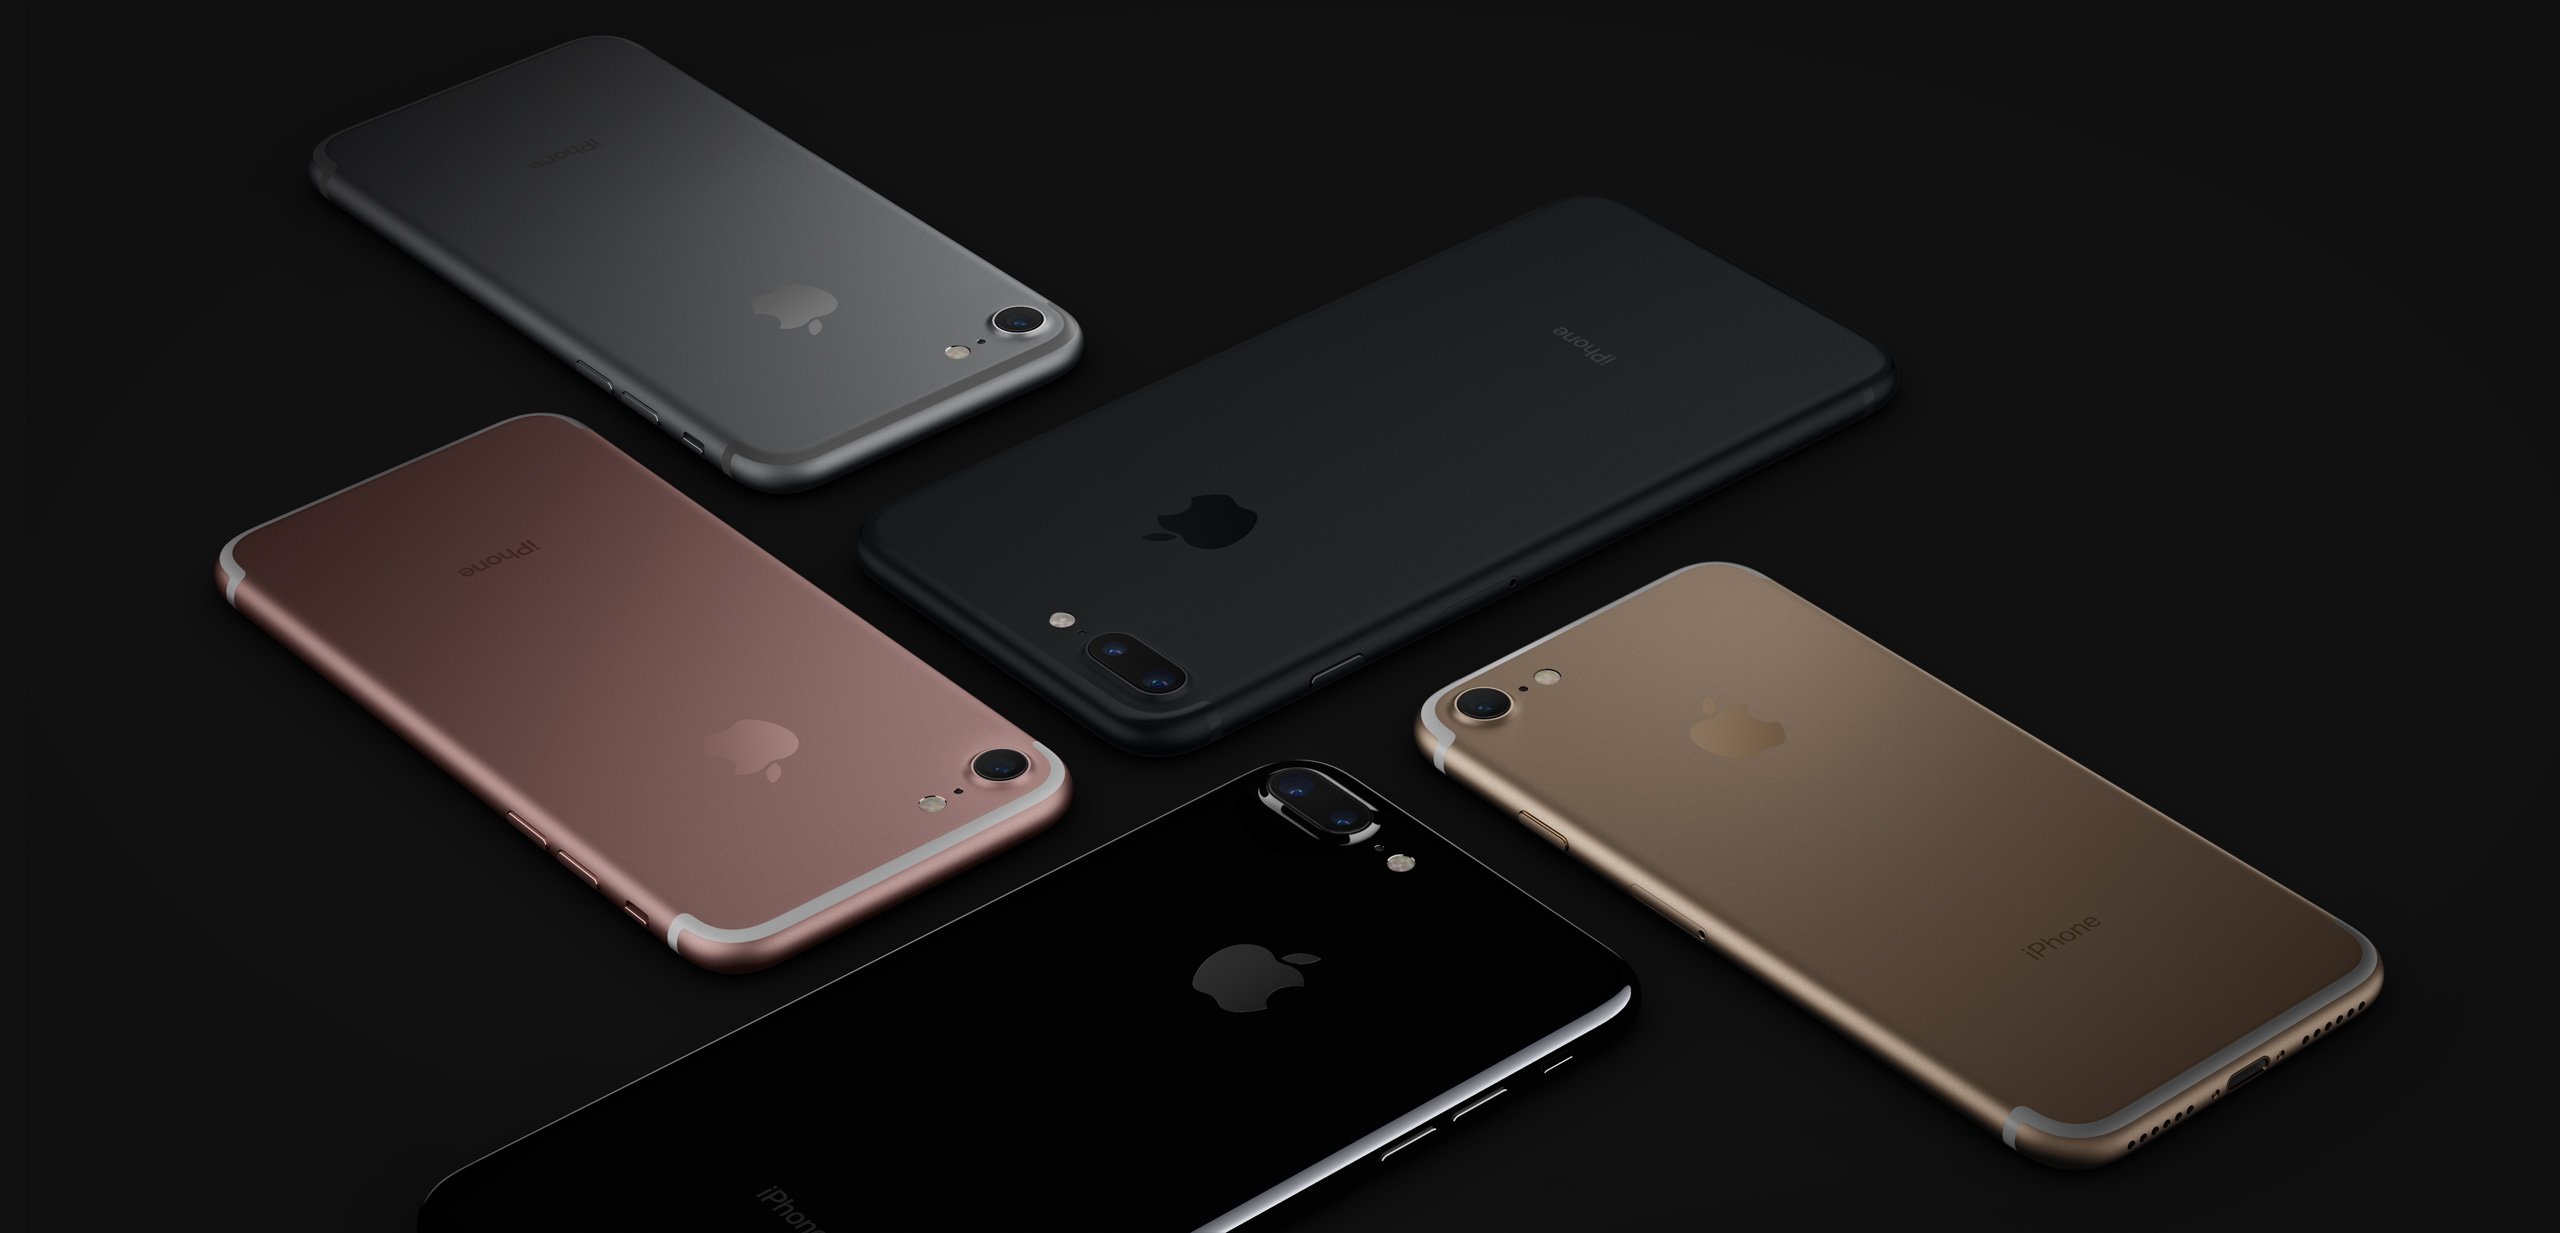 Pre-order the iPhone 7 if you want to make sure you get the color and storage capacity you want.